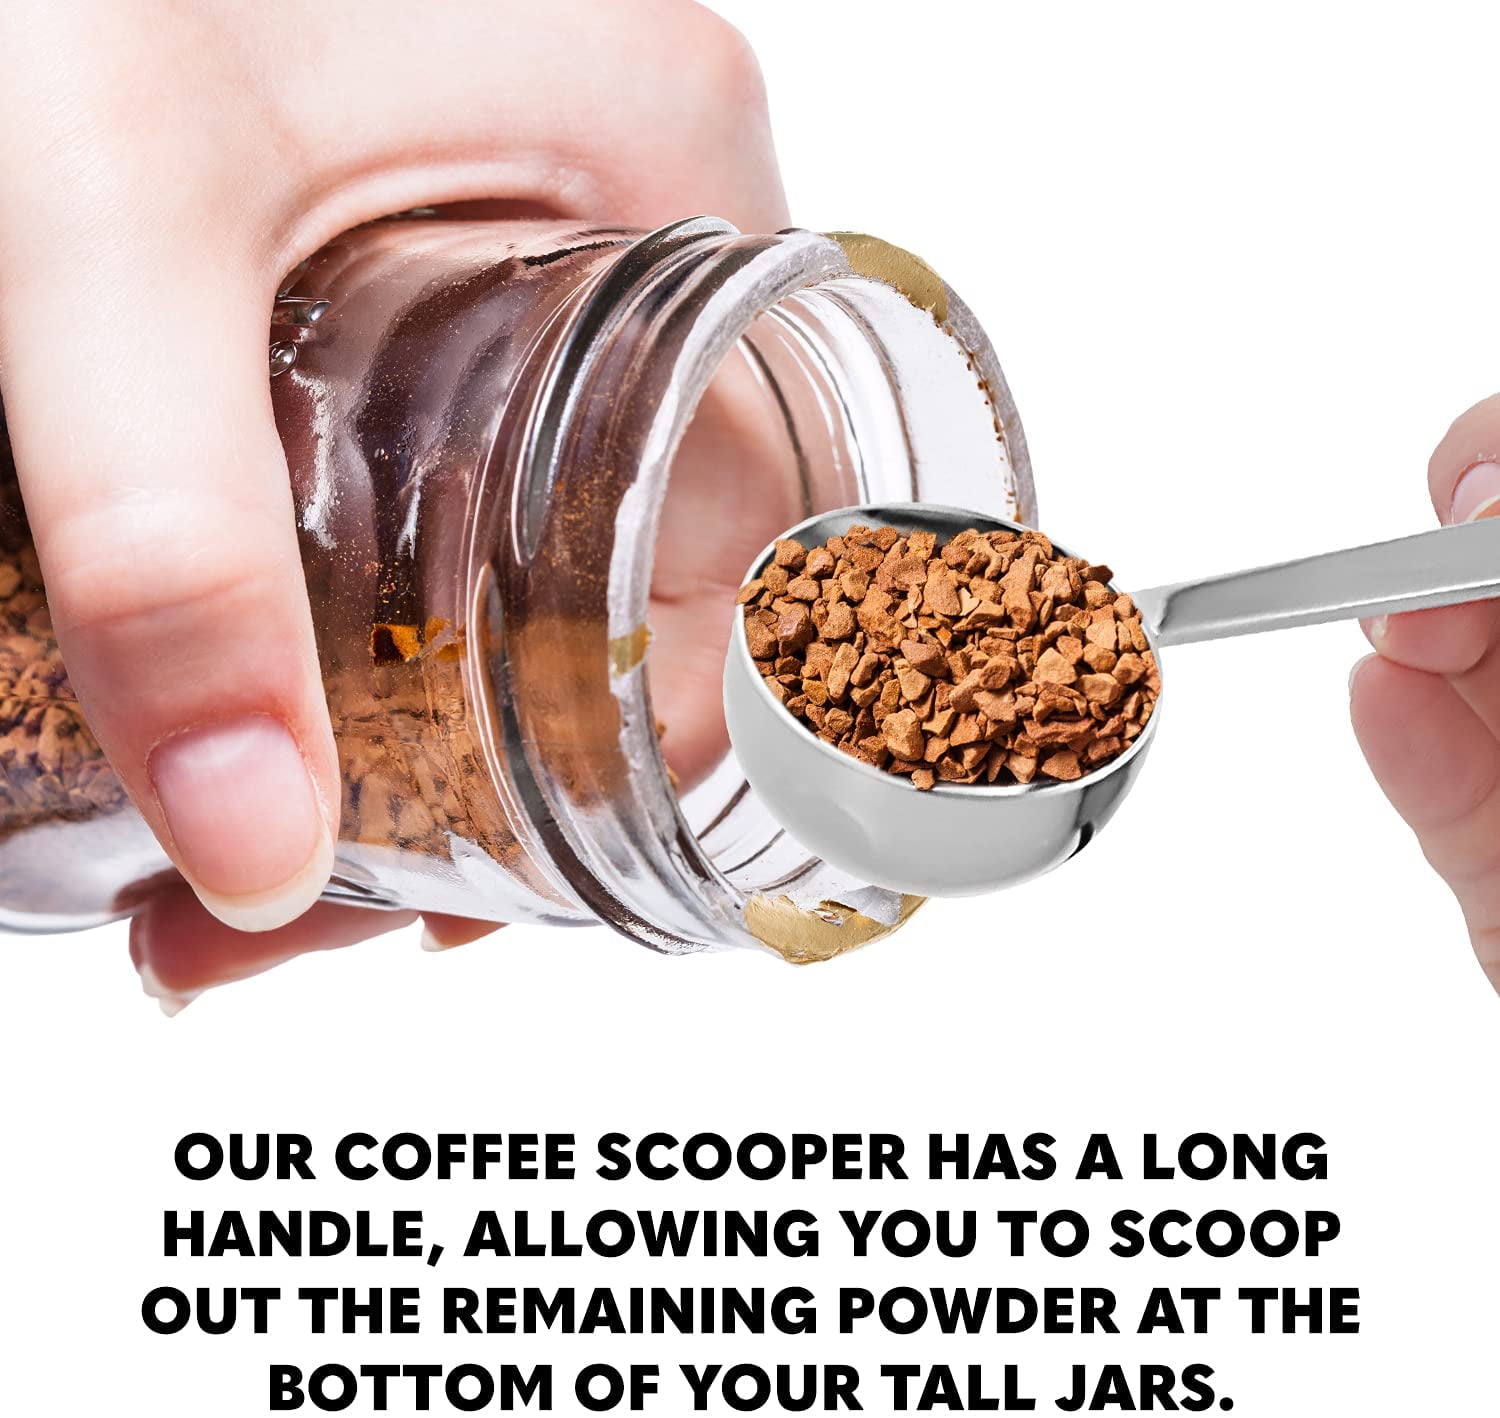 1/2 Tablespoon (1.5 Teaspoon  7.5 mL) Long Handle Scoop for Measuring  Coffee, Grains, Protein, Spices and Other Dry Goods BPA FREE $4.29